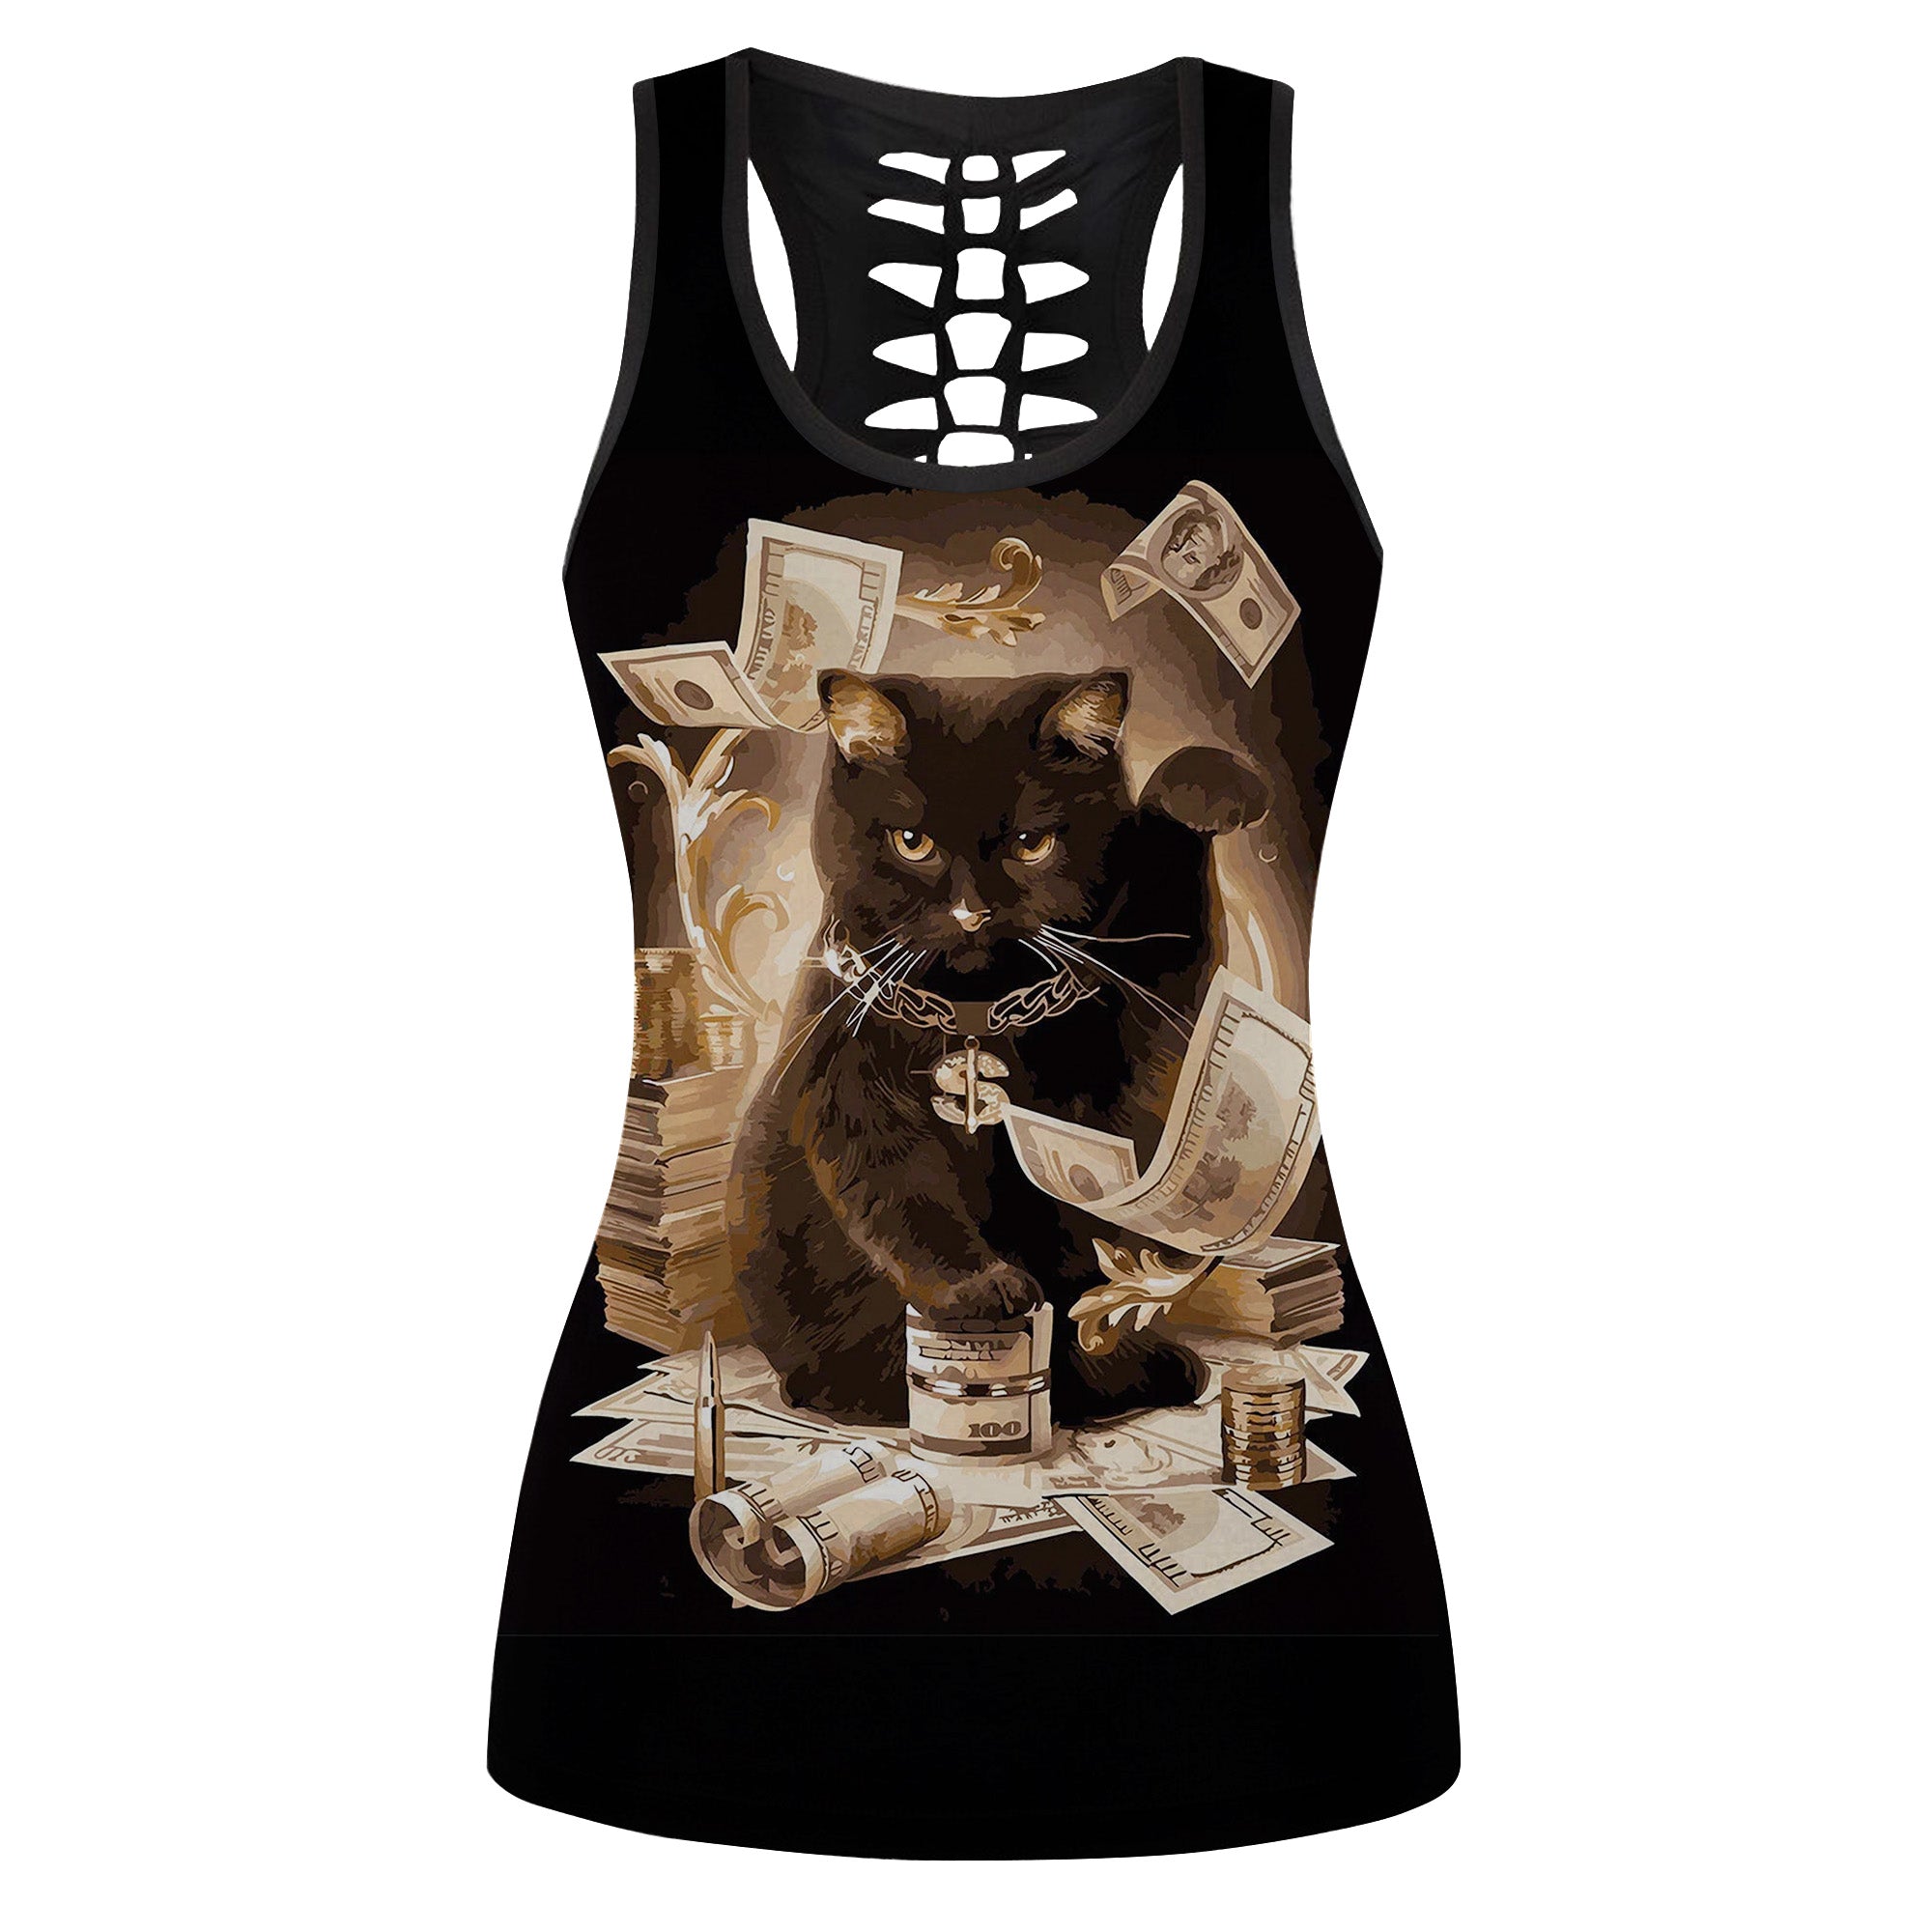 Black cats show you the money Hollow Tank Top 06117